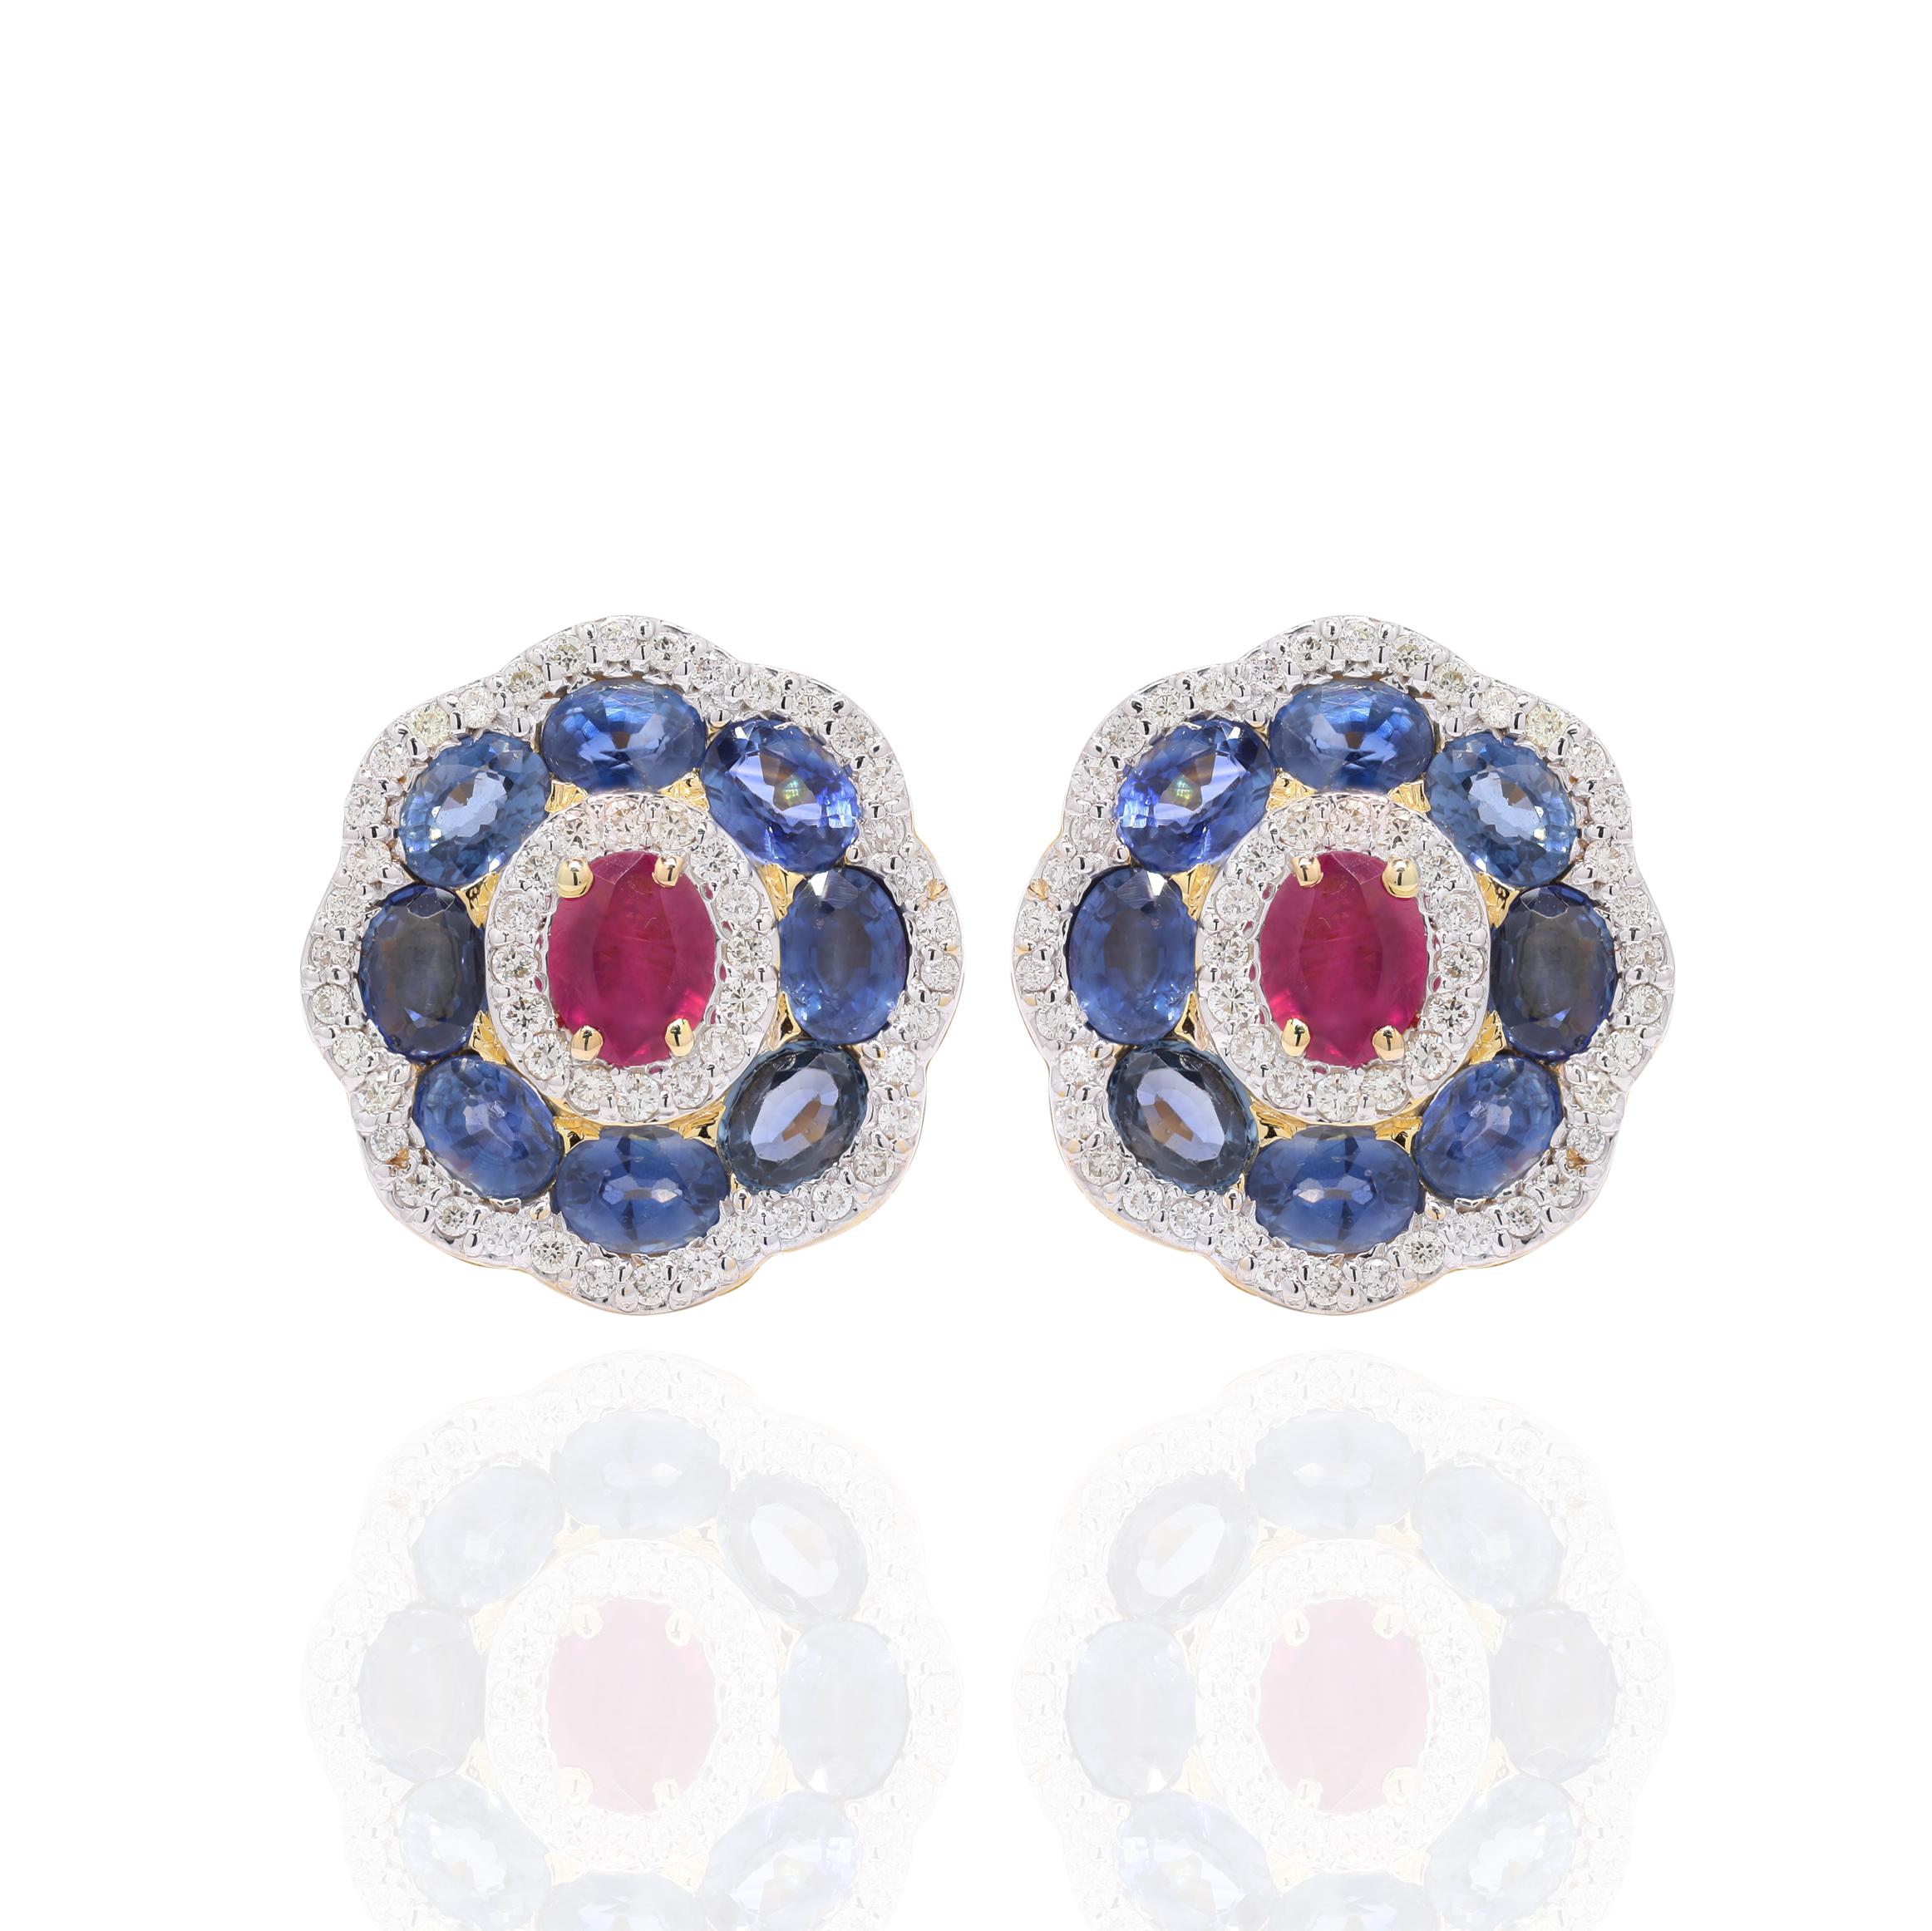 Earrings create a subtle beauty while showcasing the colors of the natural precious gemstones and illuminating diamonds making a statement.
Oval cut ruby, sapphire and diamond earrings in 18K gold. Embrace your look with these stunning pair of